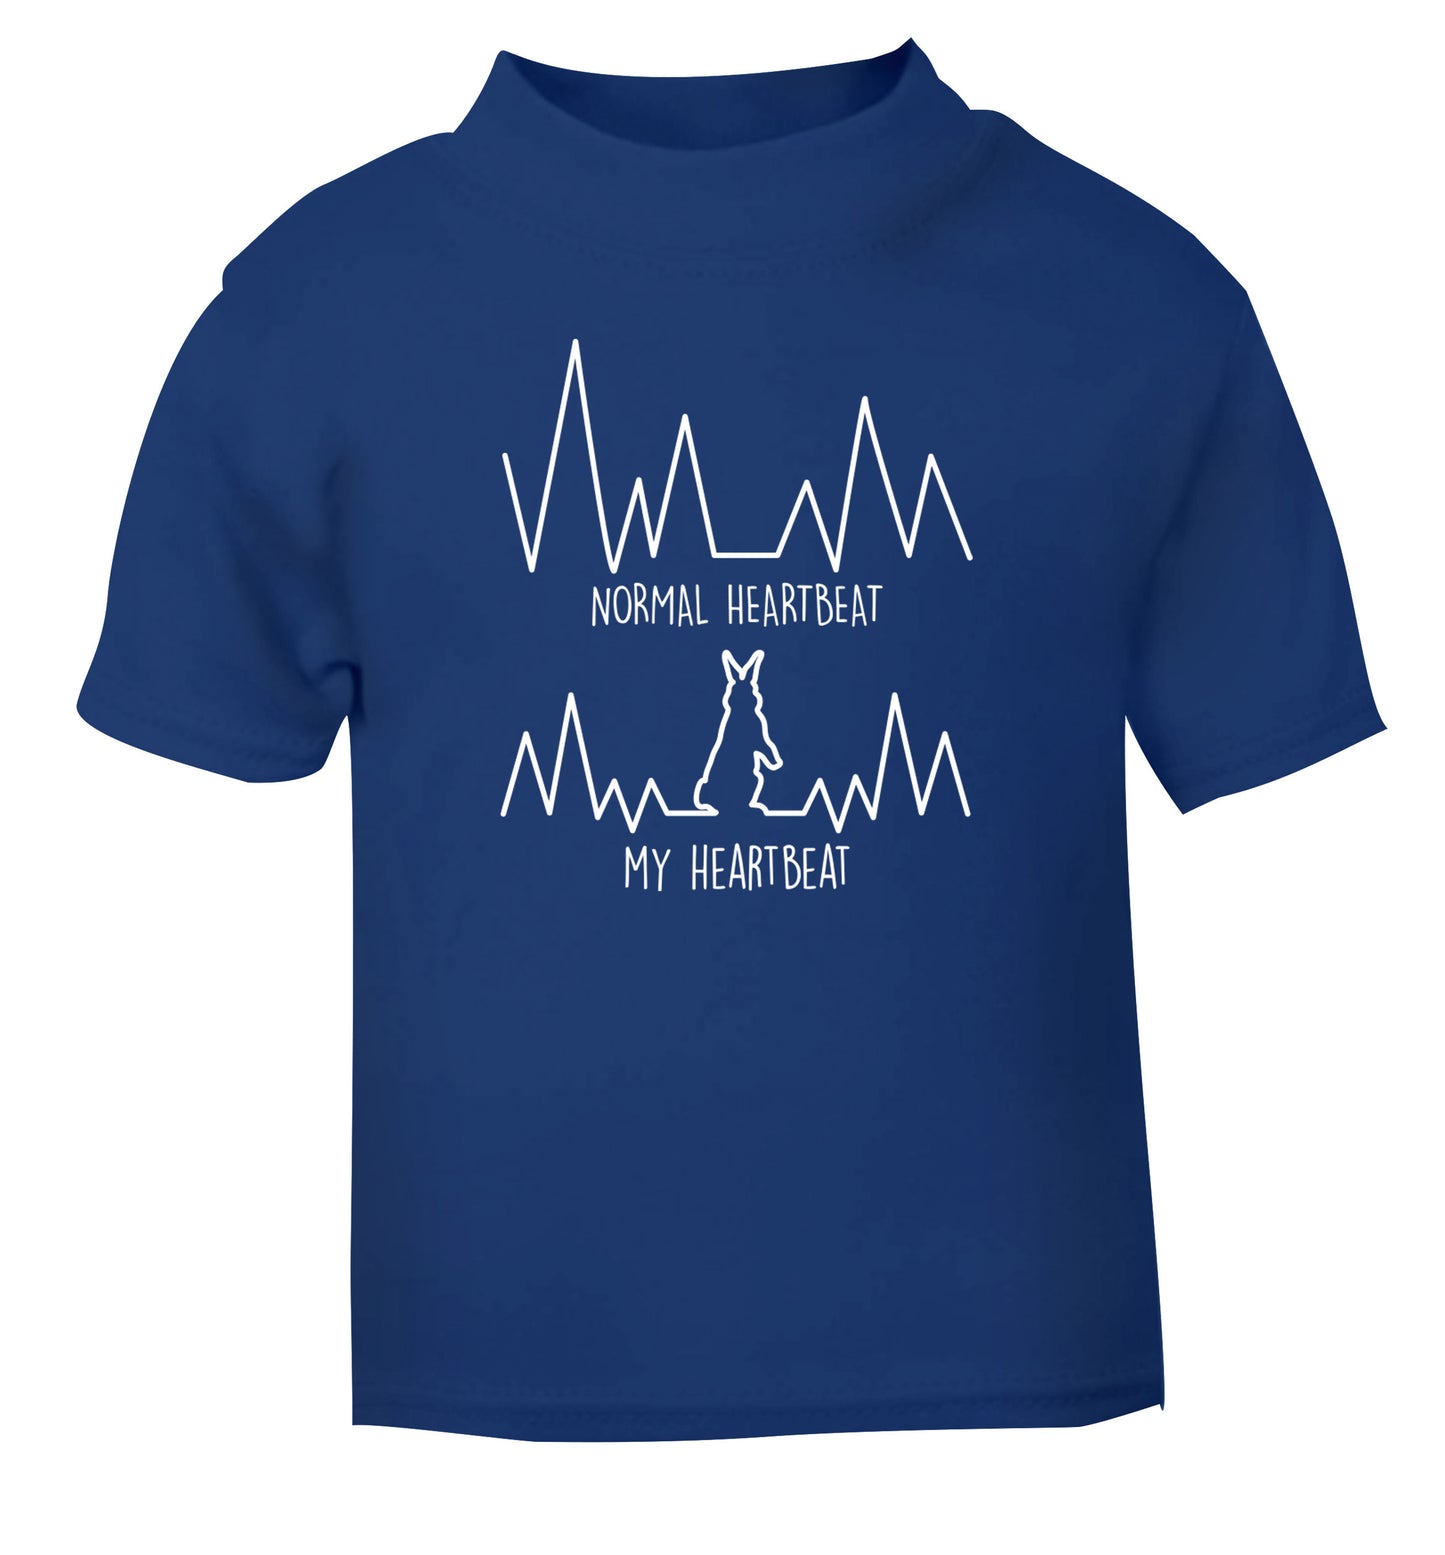 Normal heartbeat, my heartbeat rabbit lover blue Baby Toddler Tshirt 2 Years